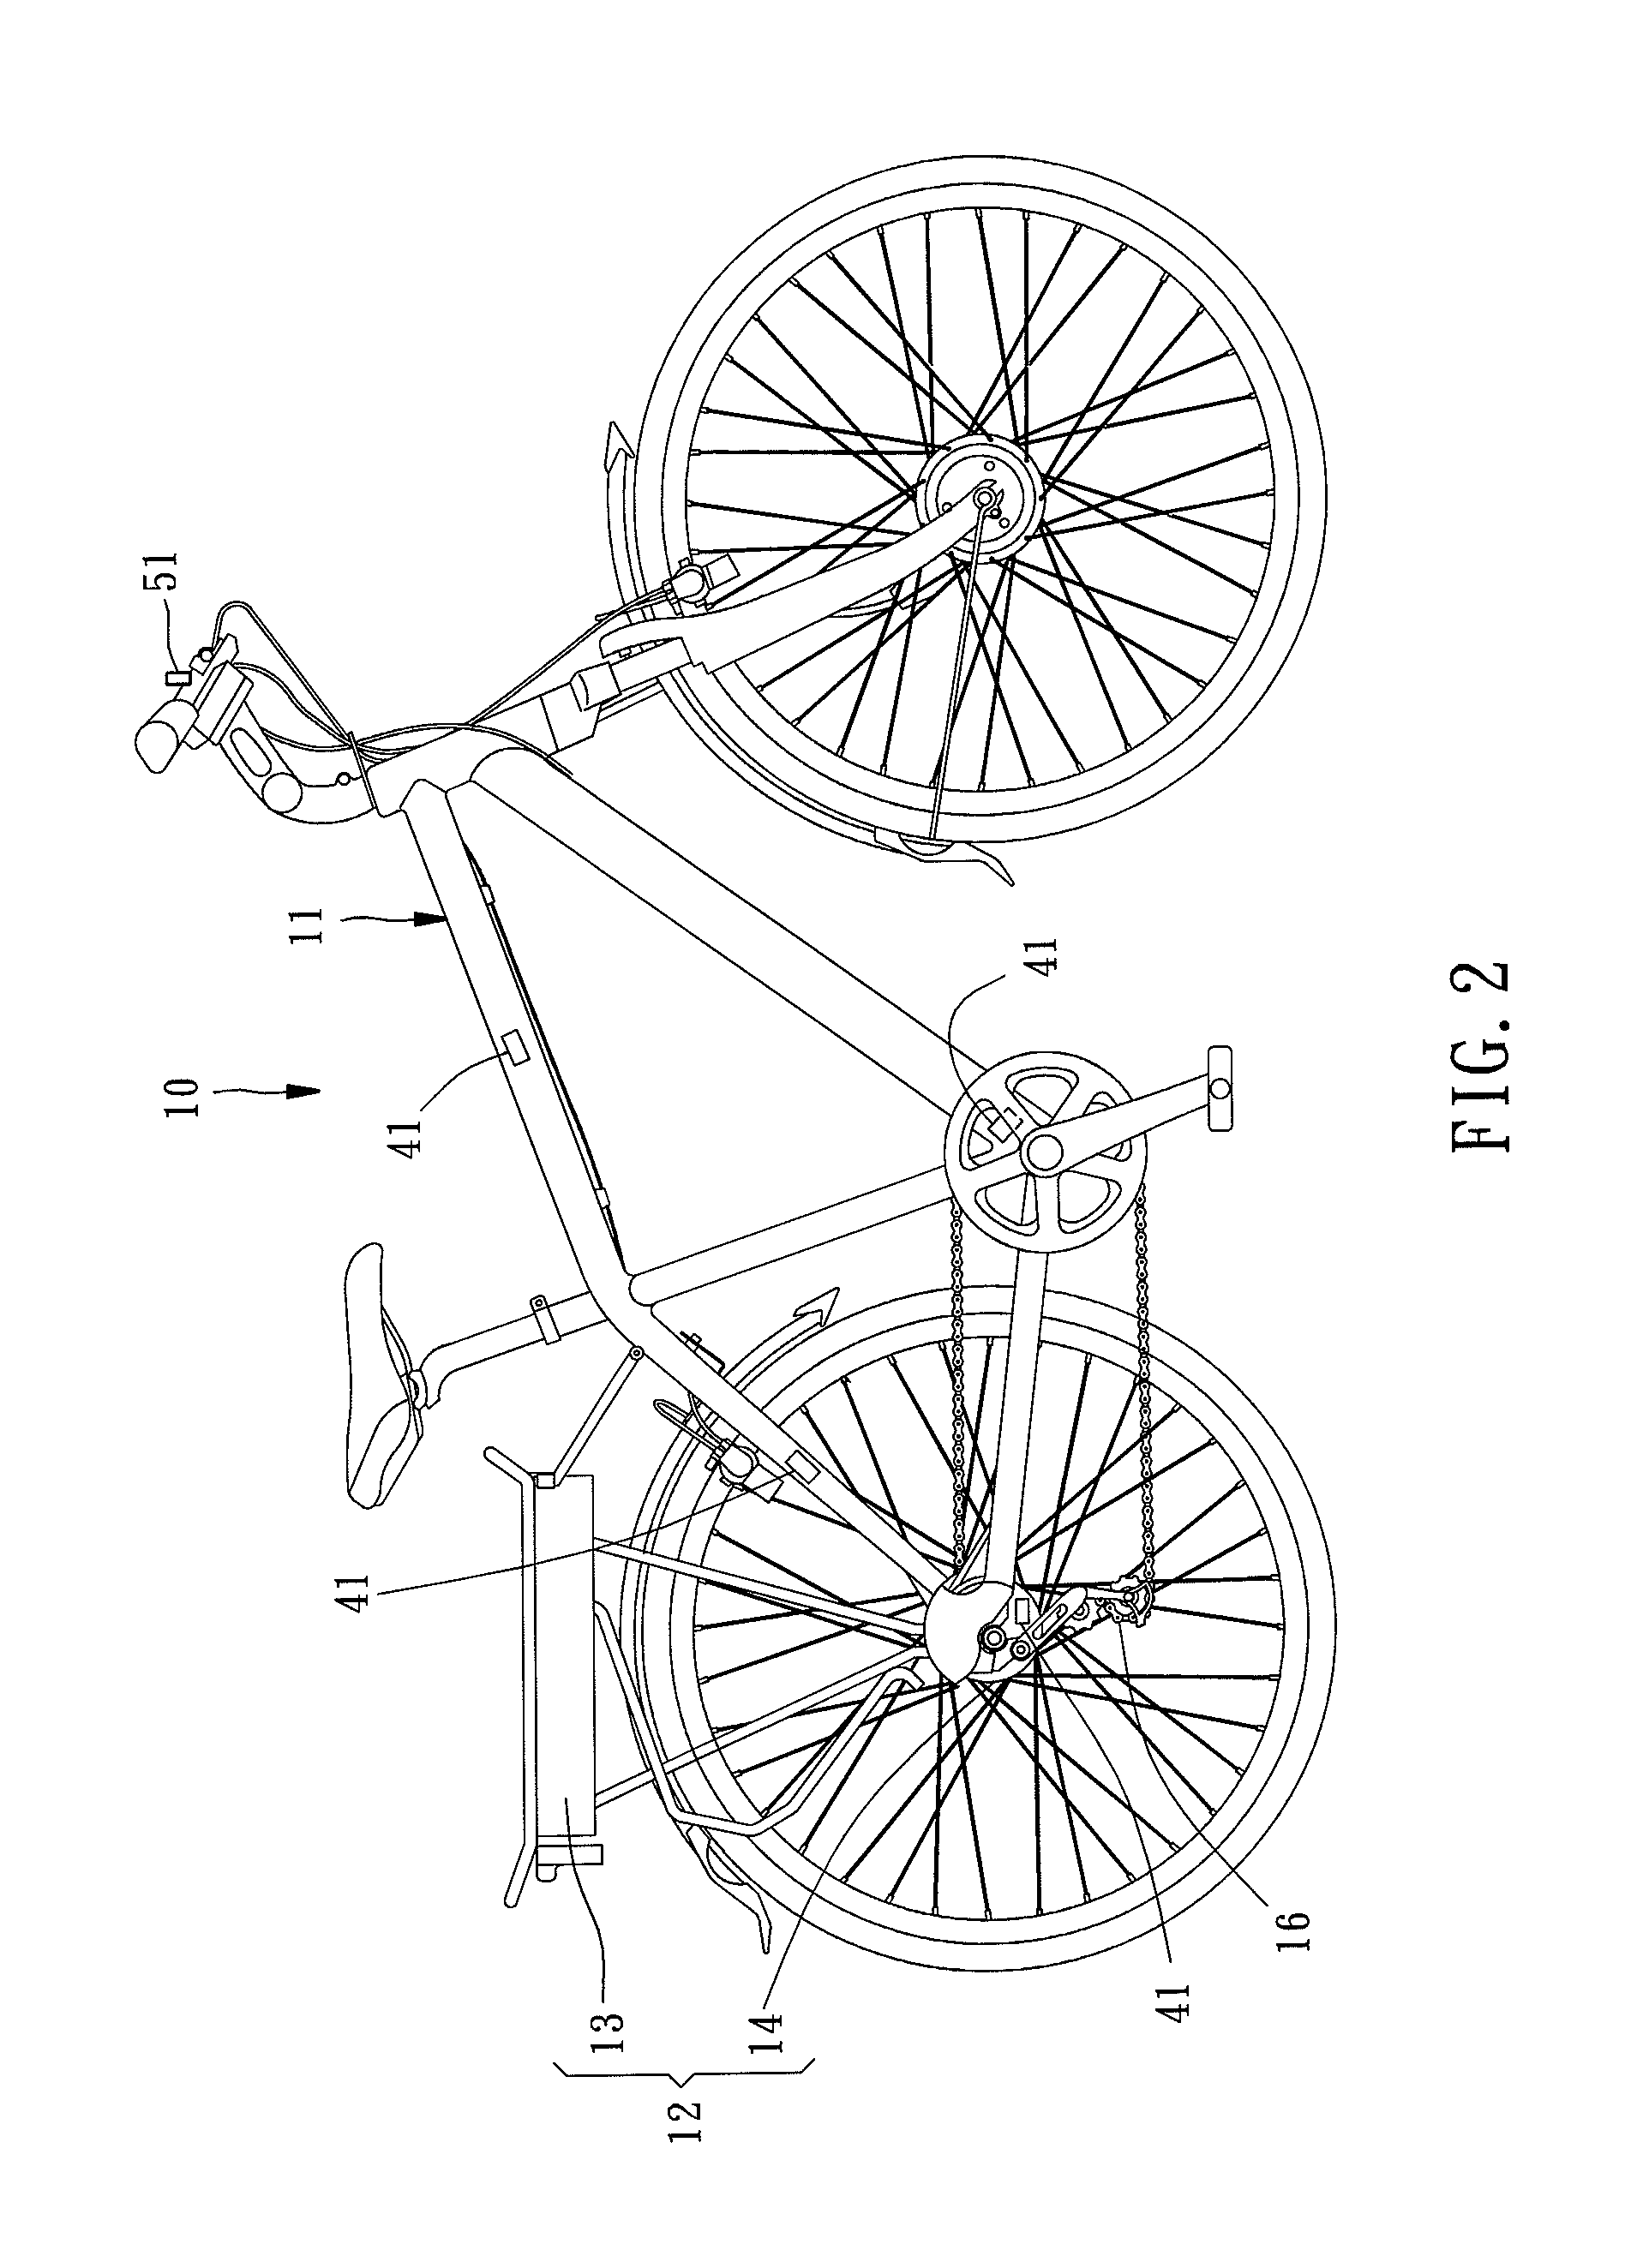 Power-assisted bicycle with a gear shift smoothening function